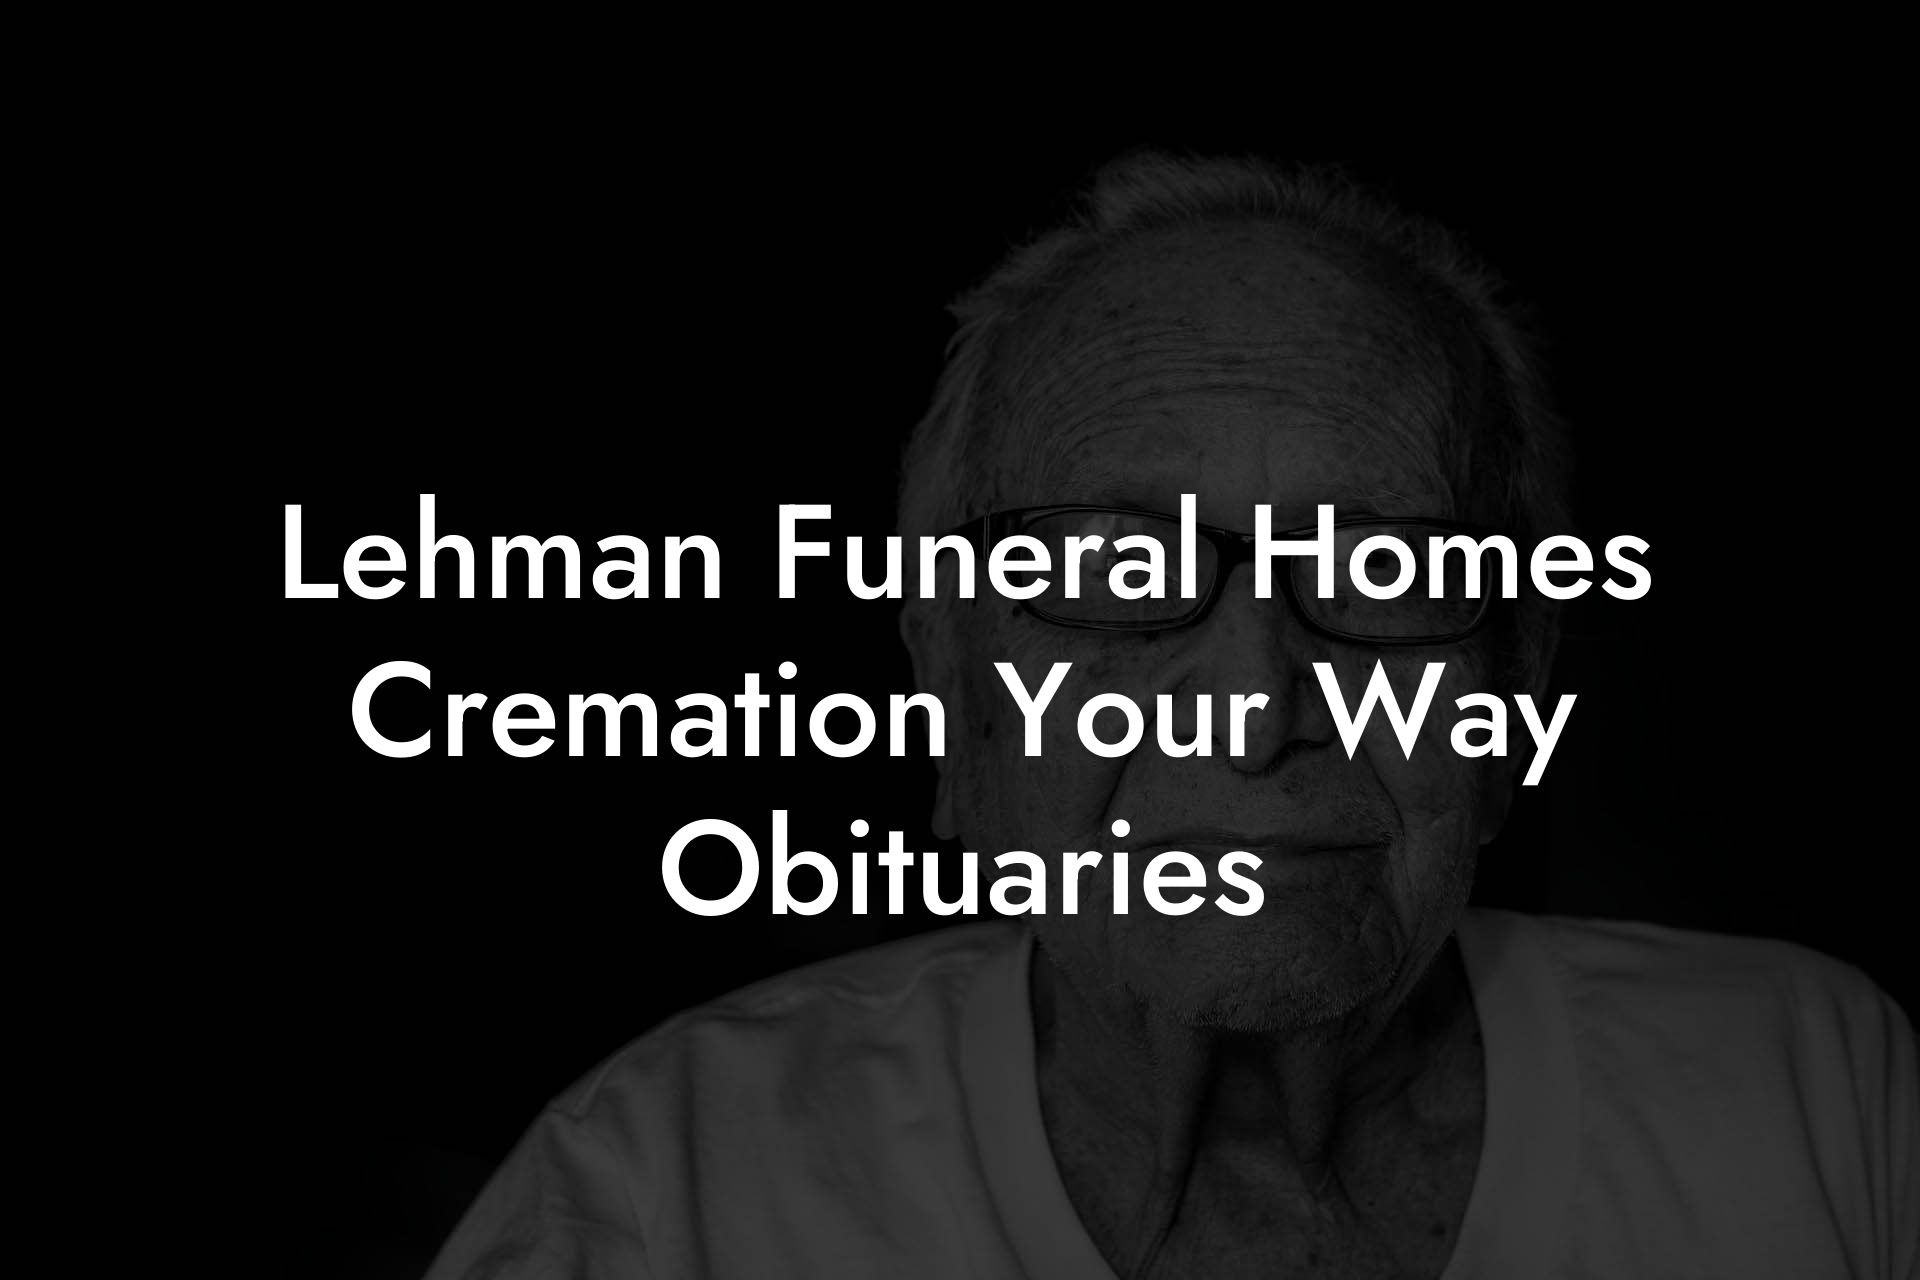 Lehman Funeral Homes Cremation Your Way Obituaries